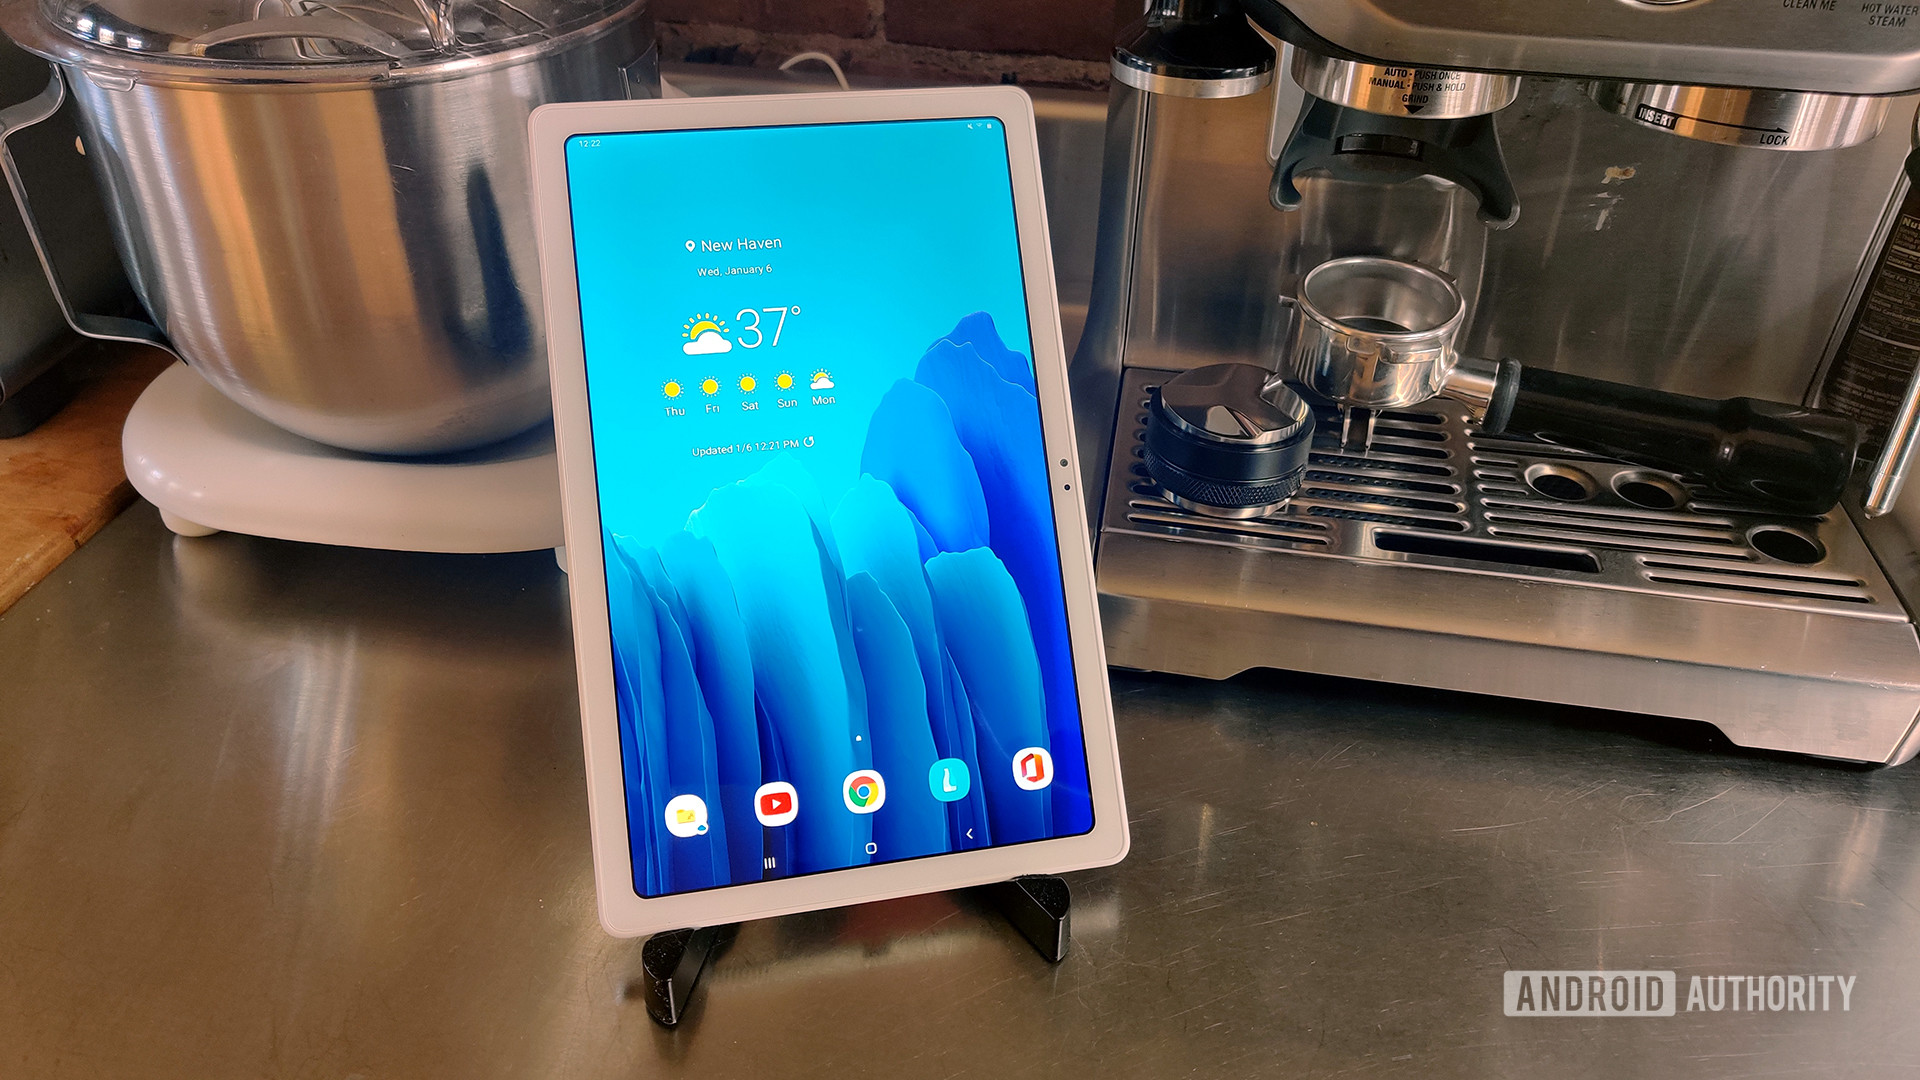 Samsung Galaxy Tab A7 2020 tablet with kitchen appliances